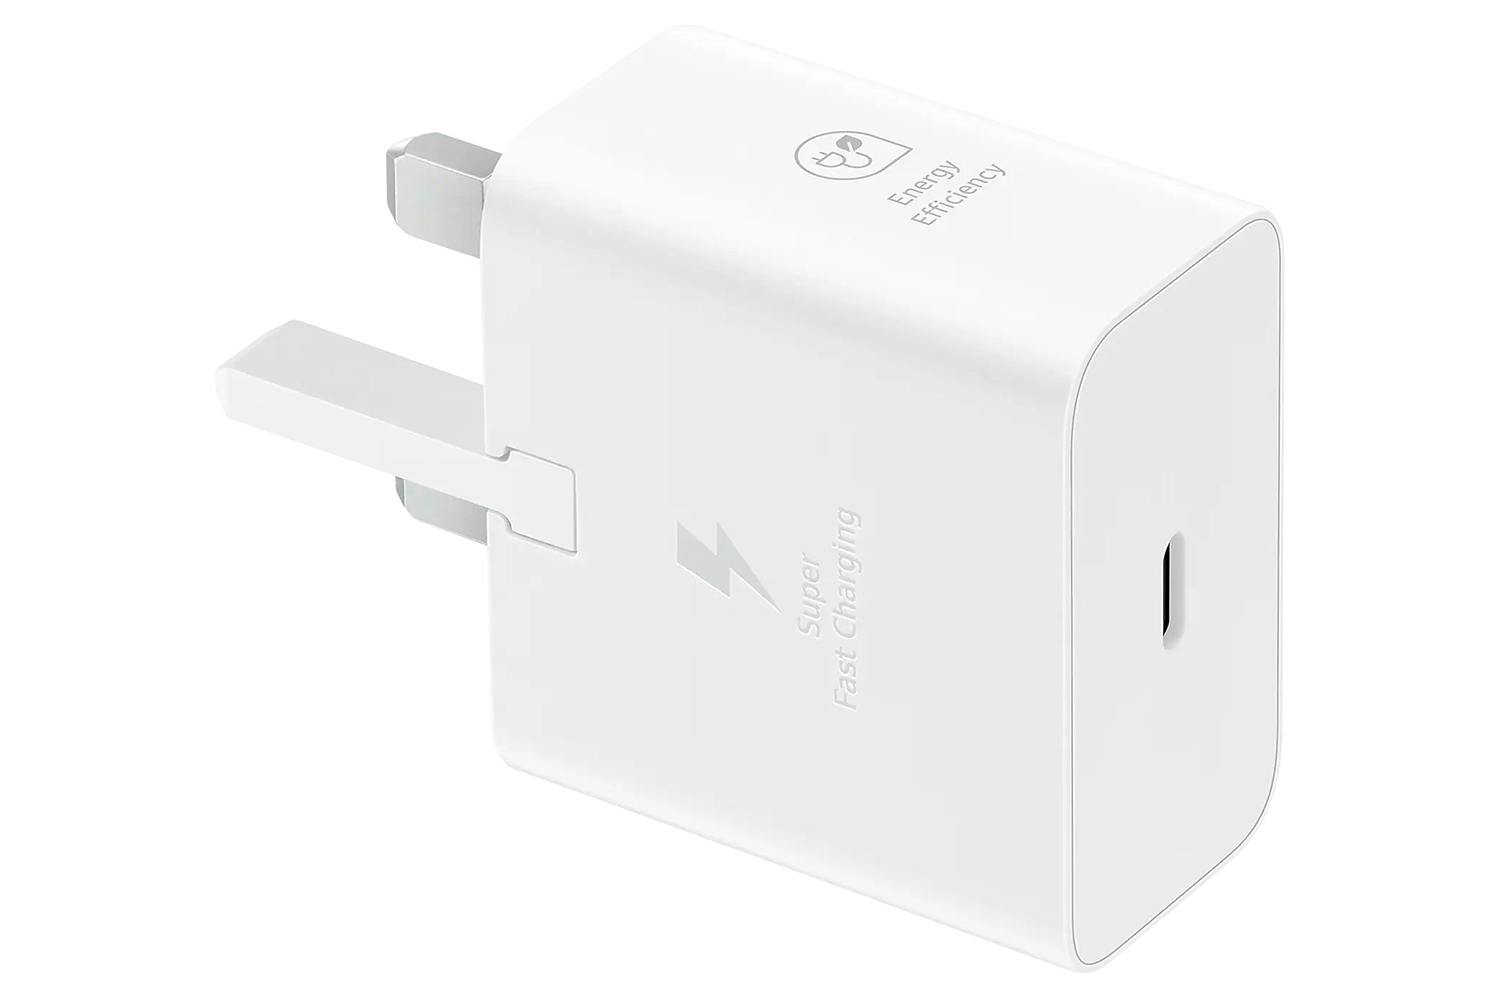 Samsung 25W Super Fast Charging Travel Adapter | White